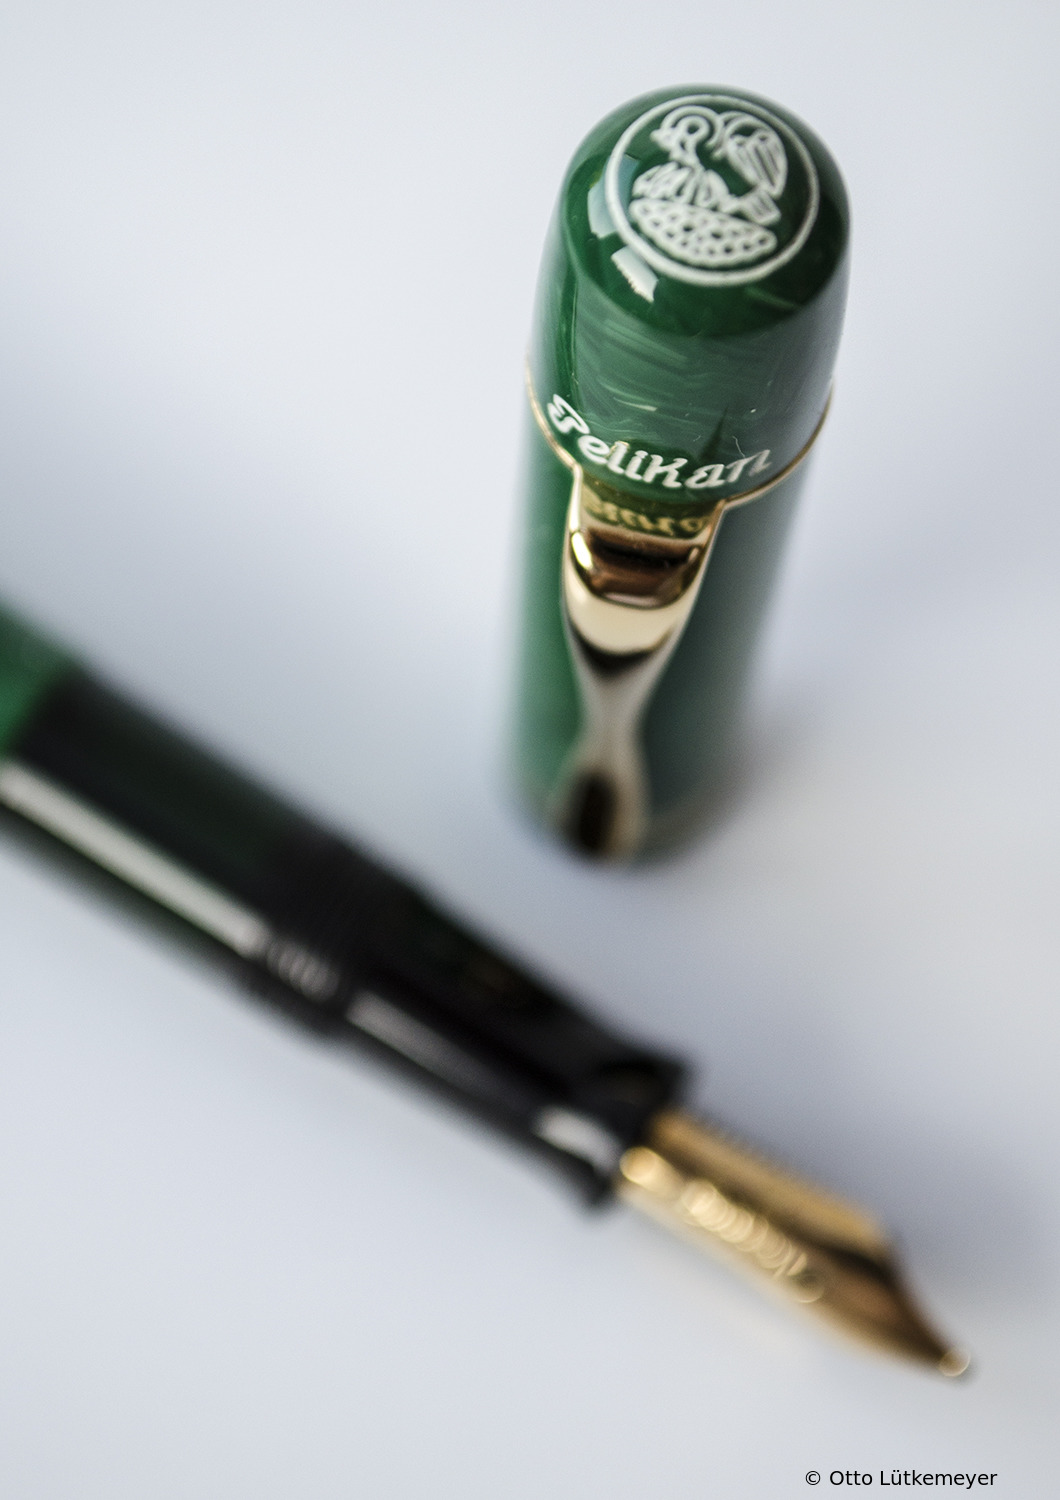 Pelikan M101 Limited Edition fountain pens